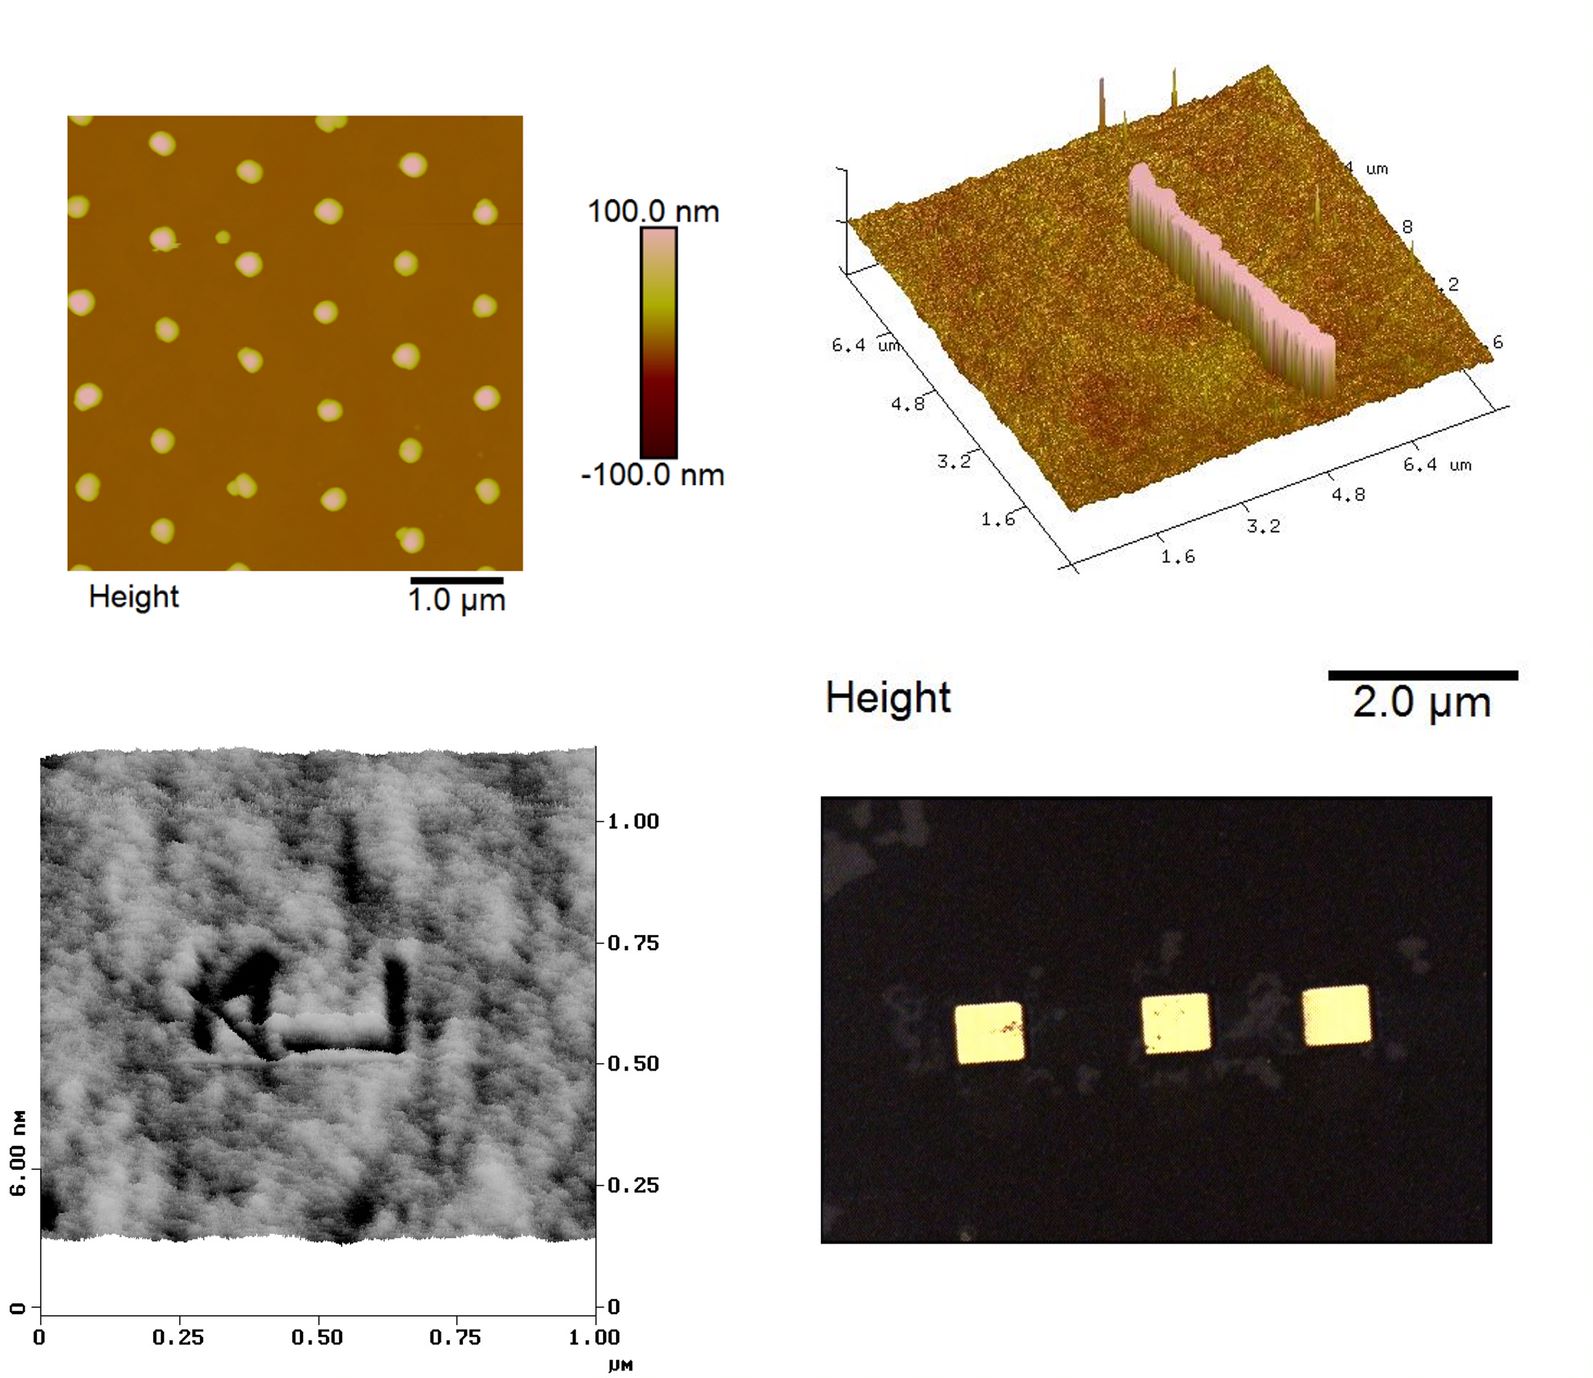 Images of metal nanodots fabricated using particle lithography, metal nanowires created with AFM-based methods, a nanoscale KU fabricated using the AFM, and metal nanostructures created with novel salt-based resist materials.